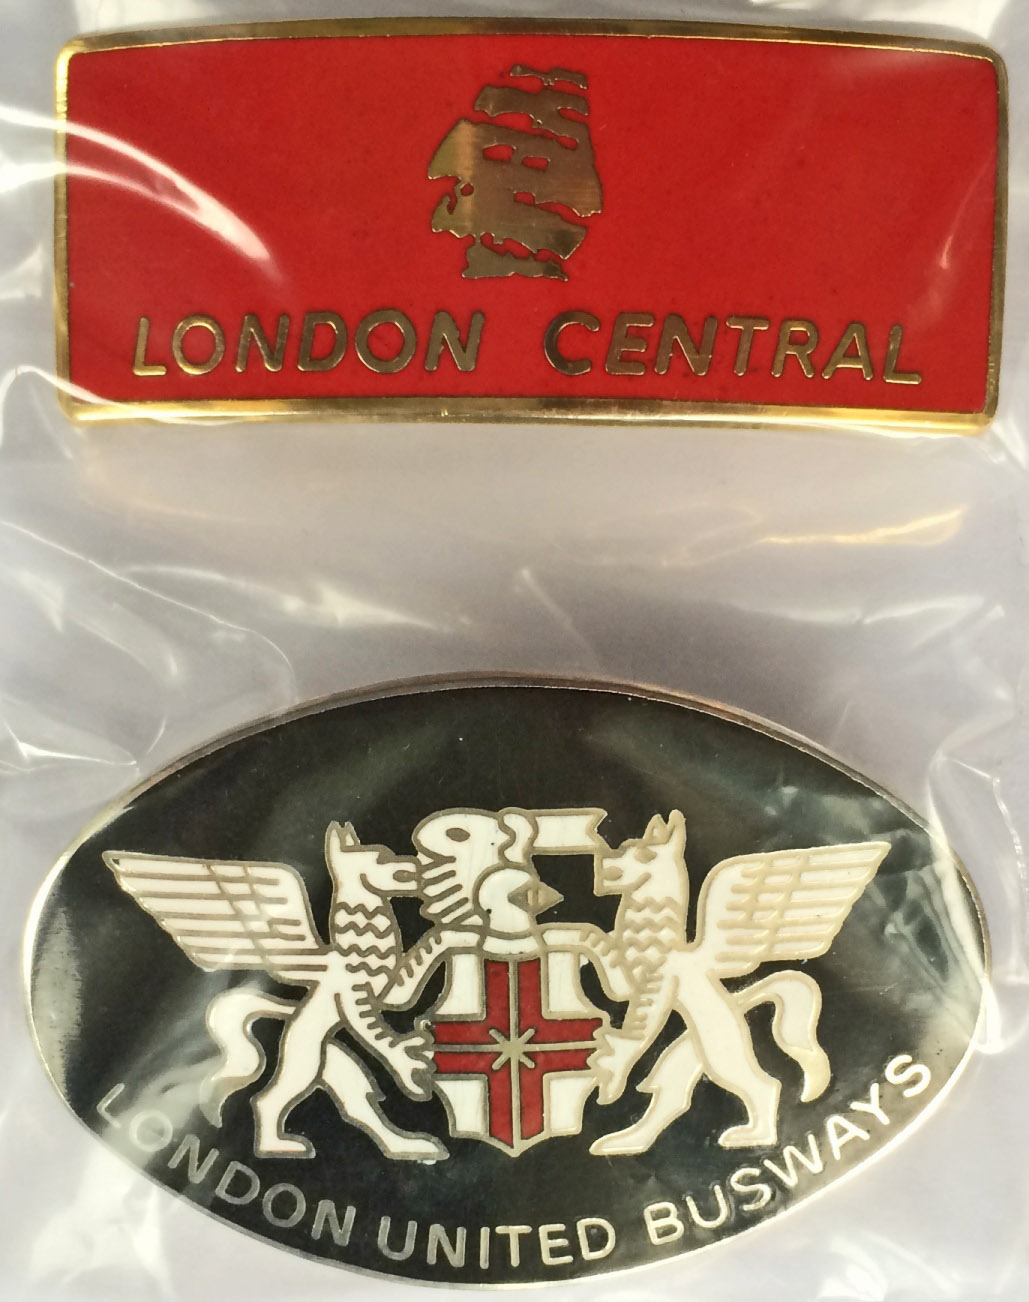 London Buses CAP BADGES issued by the pre-privatisation operating subsidiaries London Central and